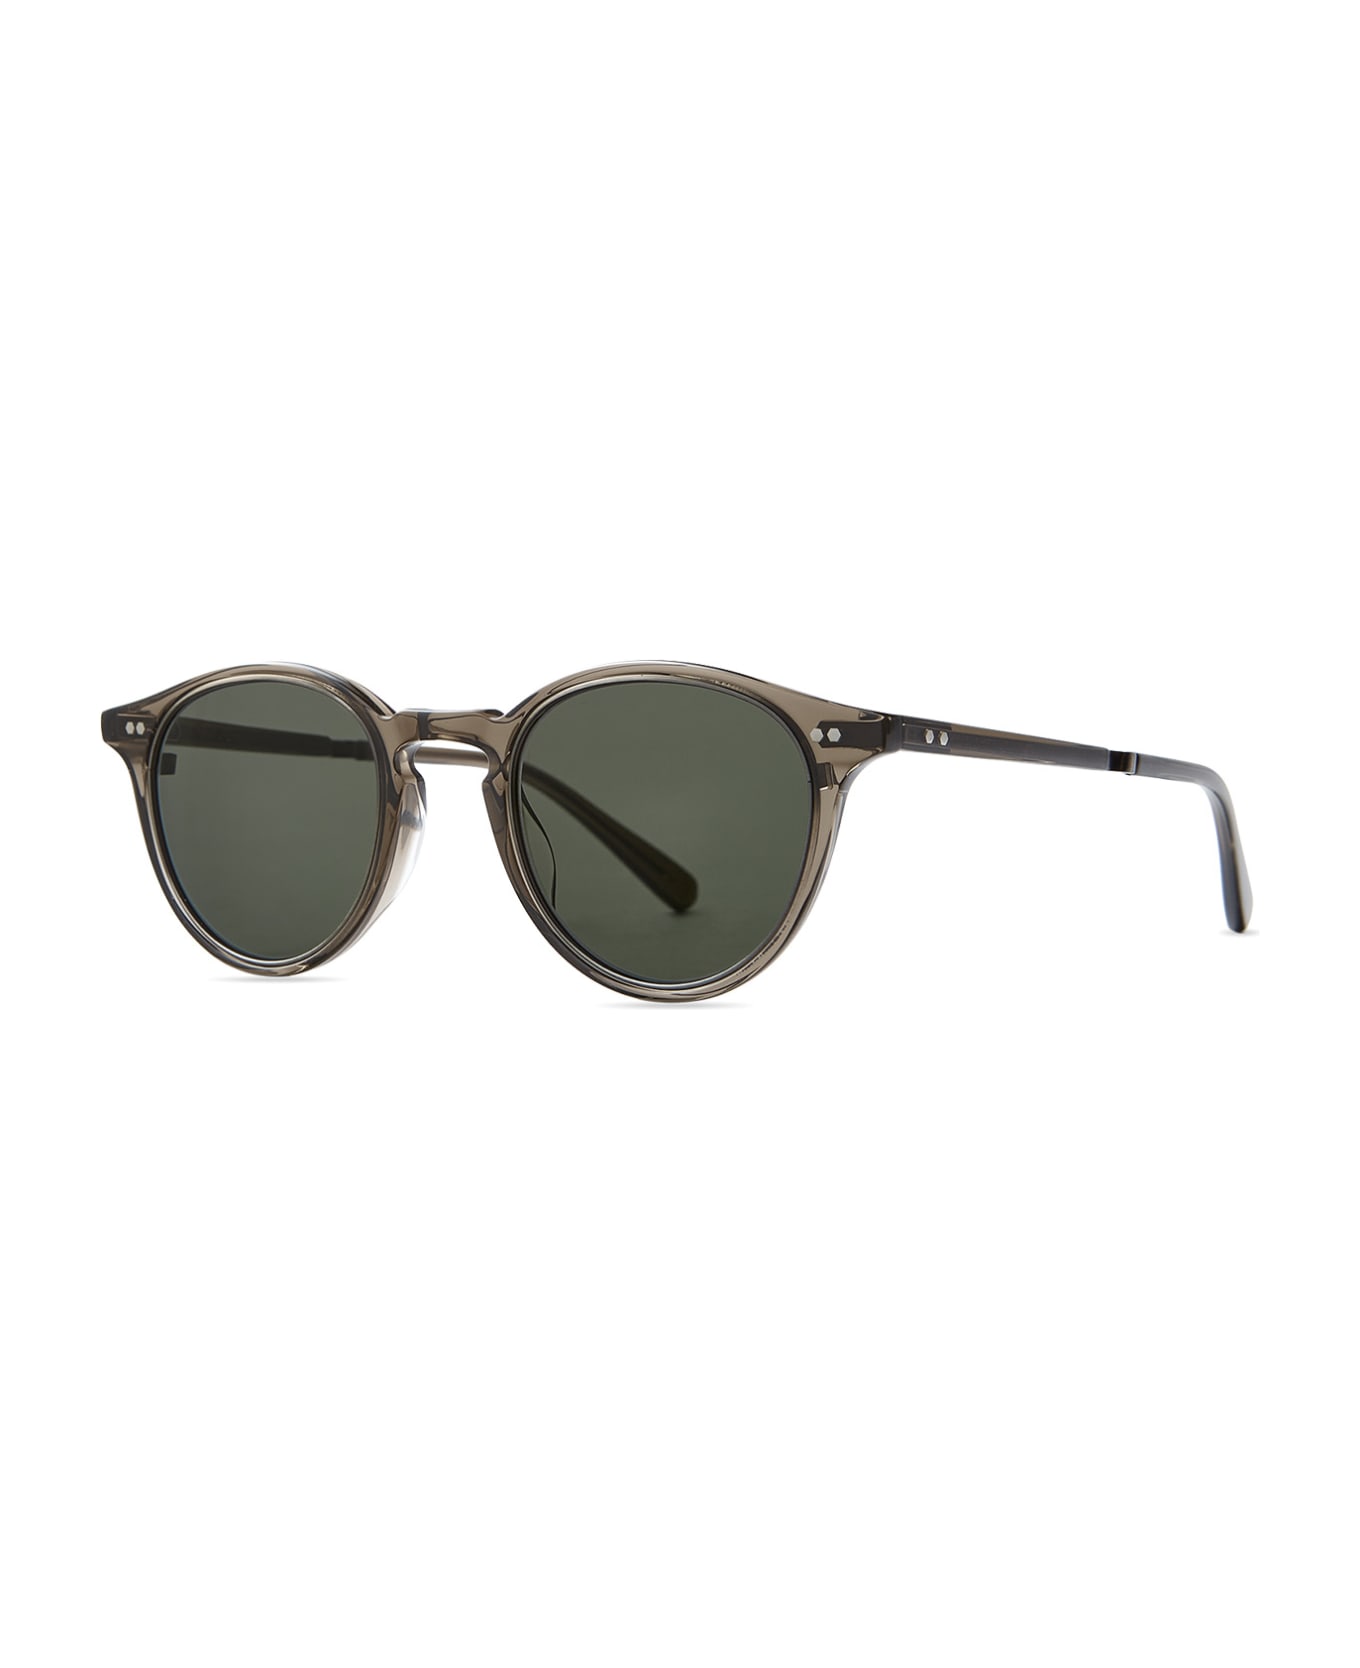 Mr. Leight Marmont Ii S Stone-pewter Sunglasses Ocean - Stone-Pewter